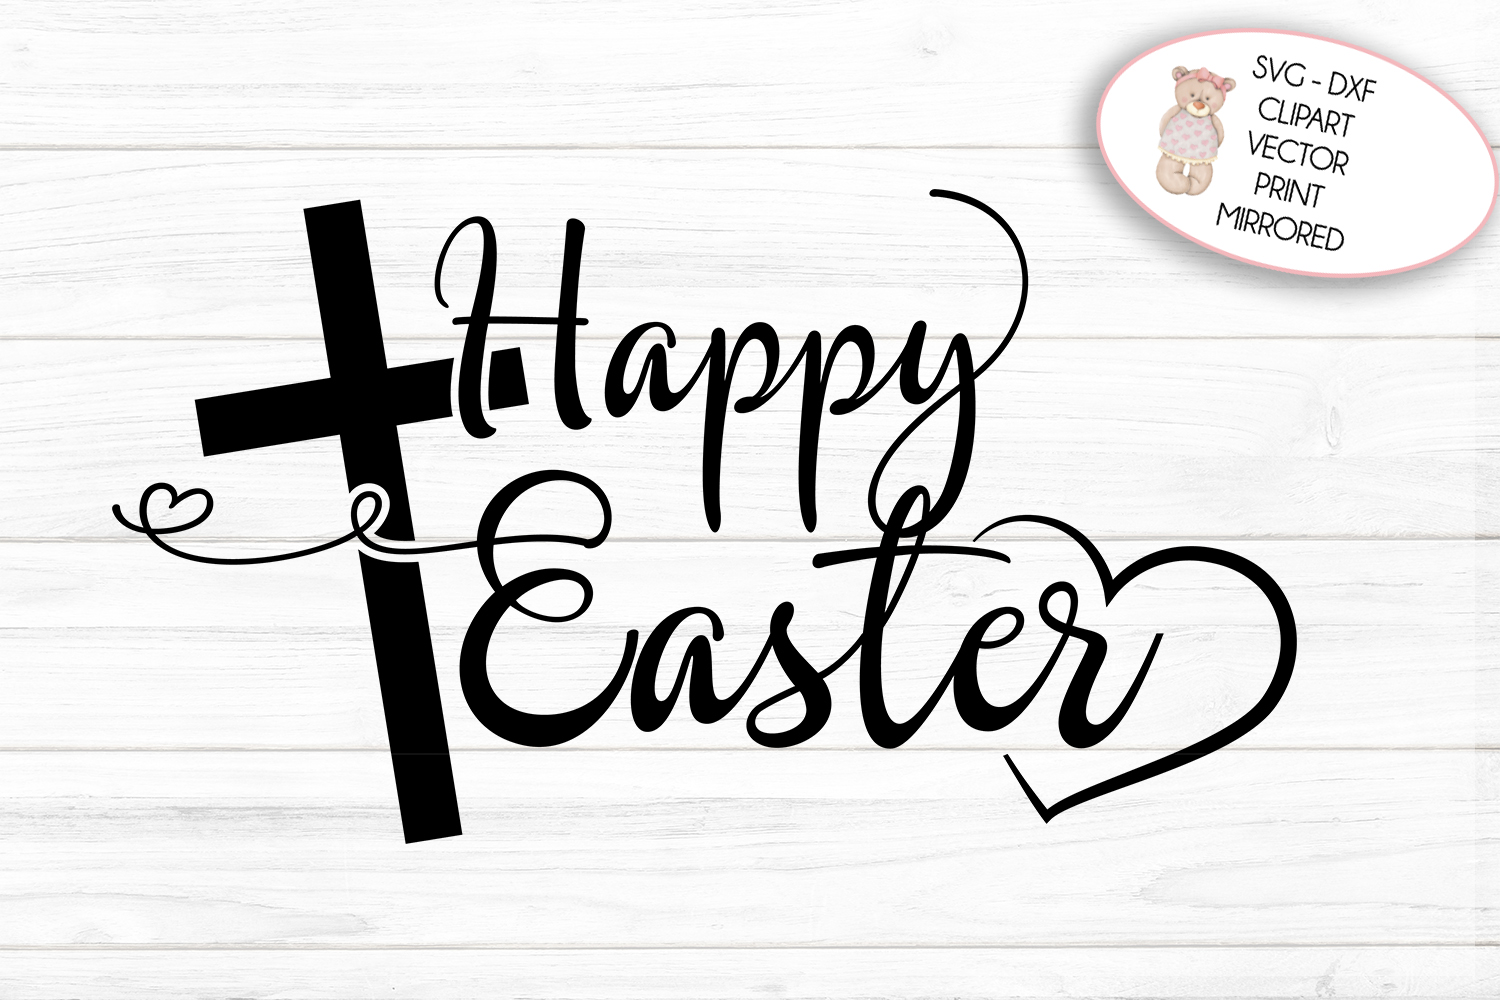 Happy Easter with Cross svg cut file, clipart, print (235474) SVGs